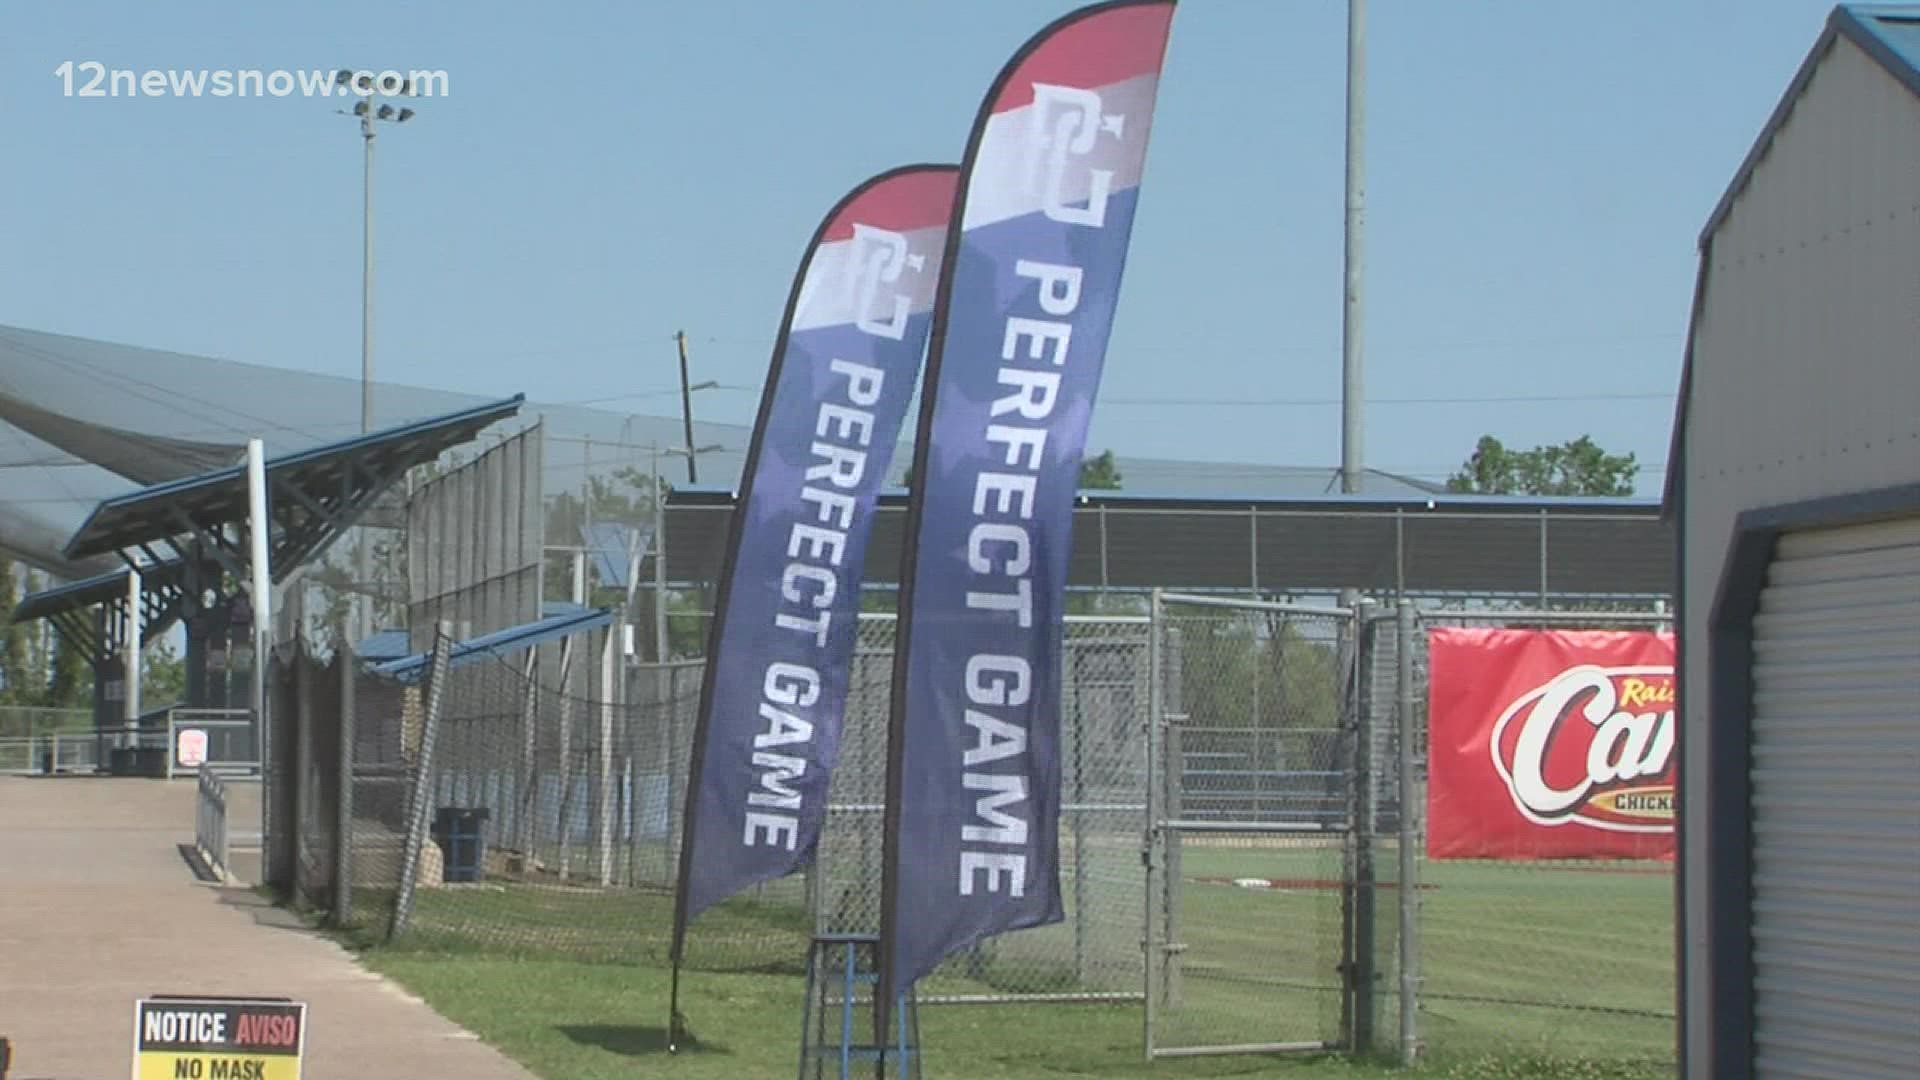 277 youth baseball teams will be competing in the area this weekend